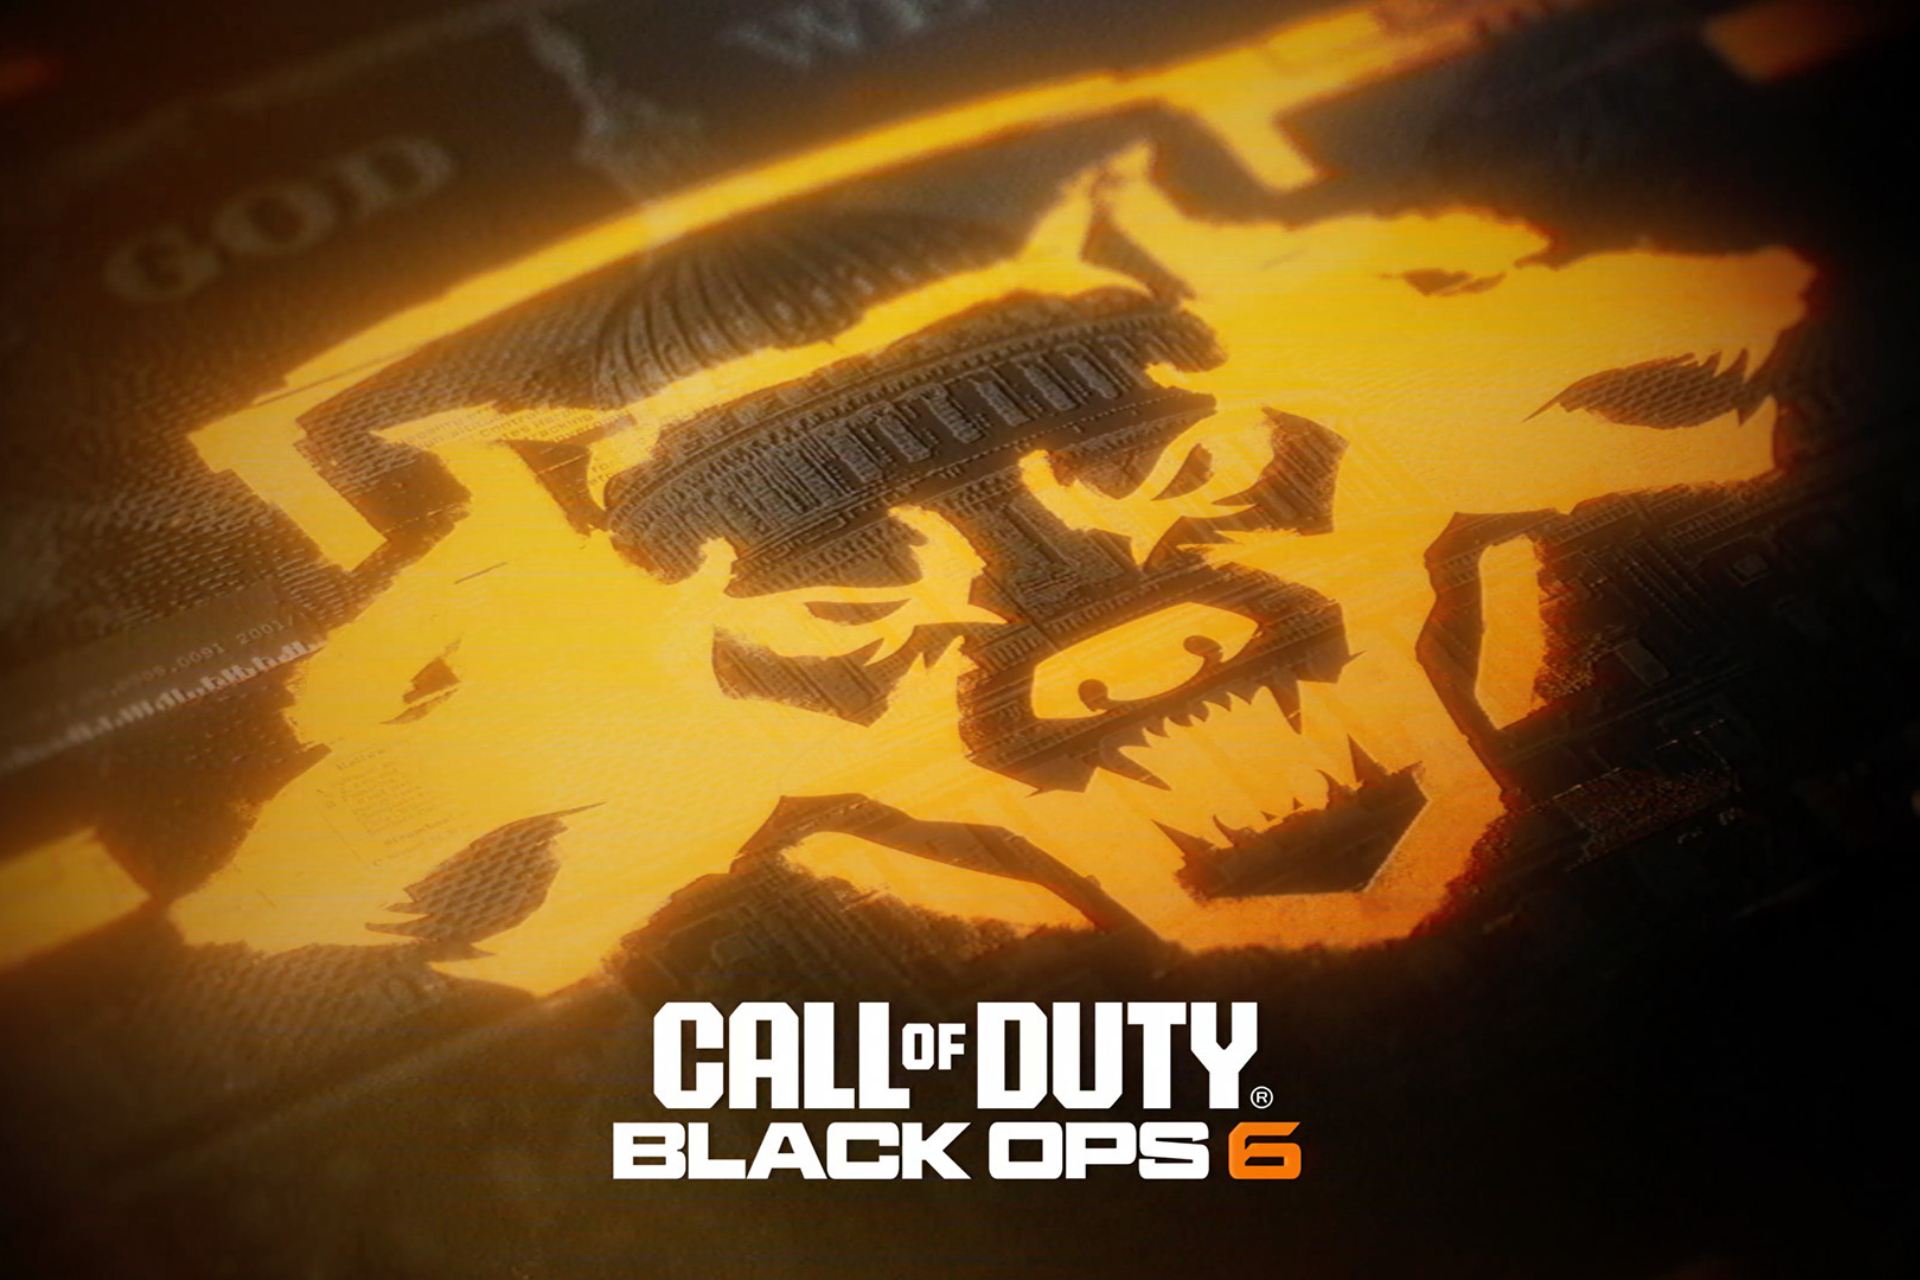 Call of Duty: Black Ops 6 mistakenly announced earlier by Microsoft